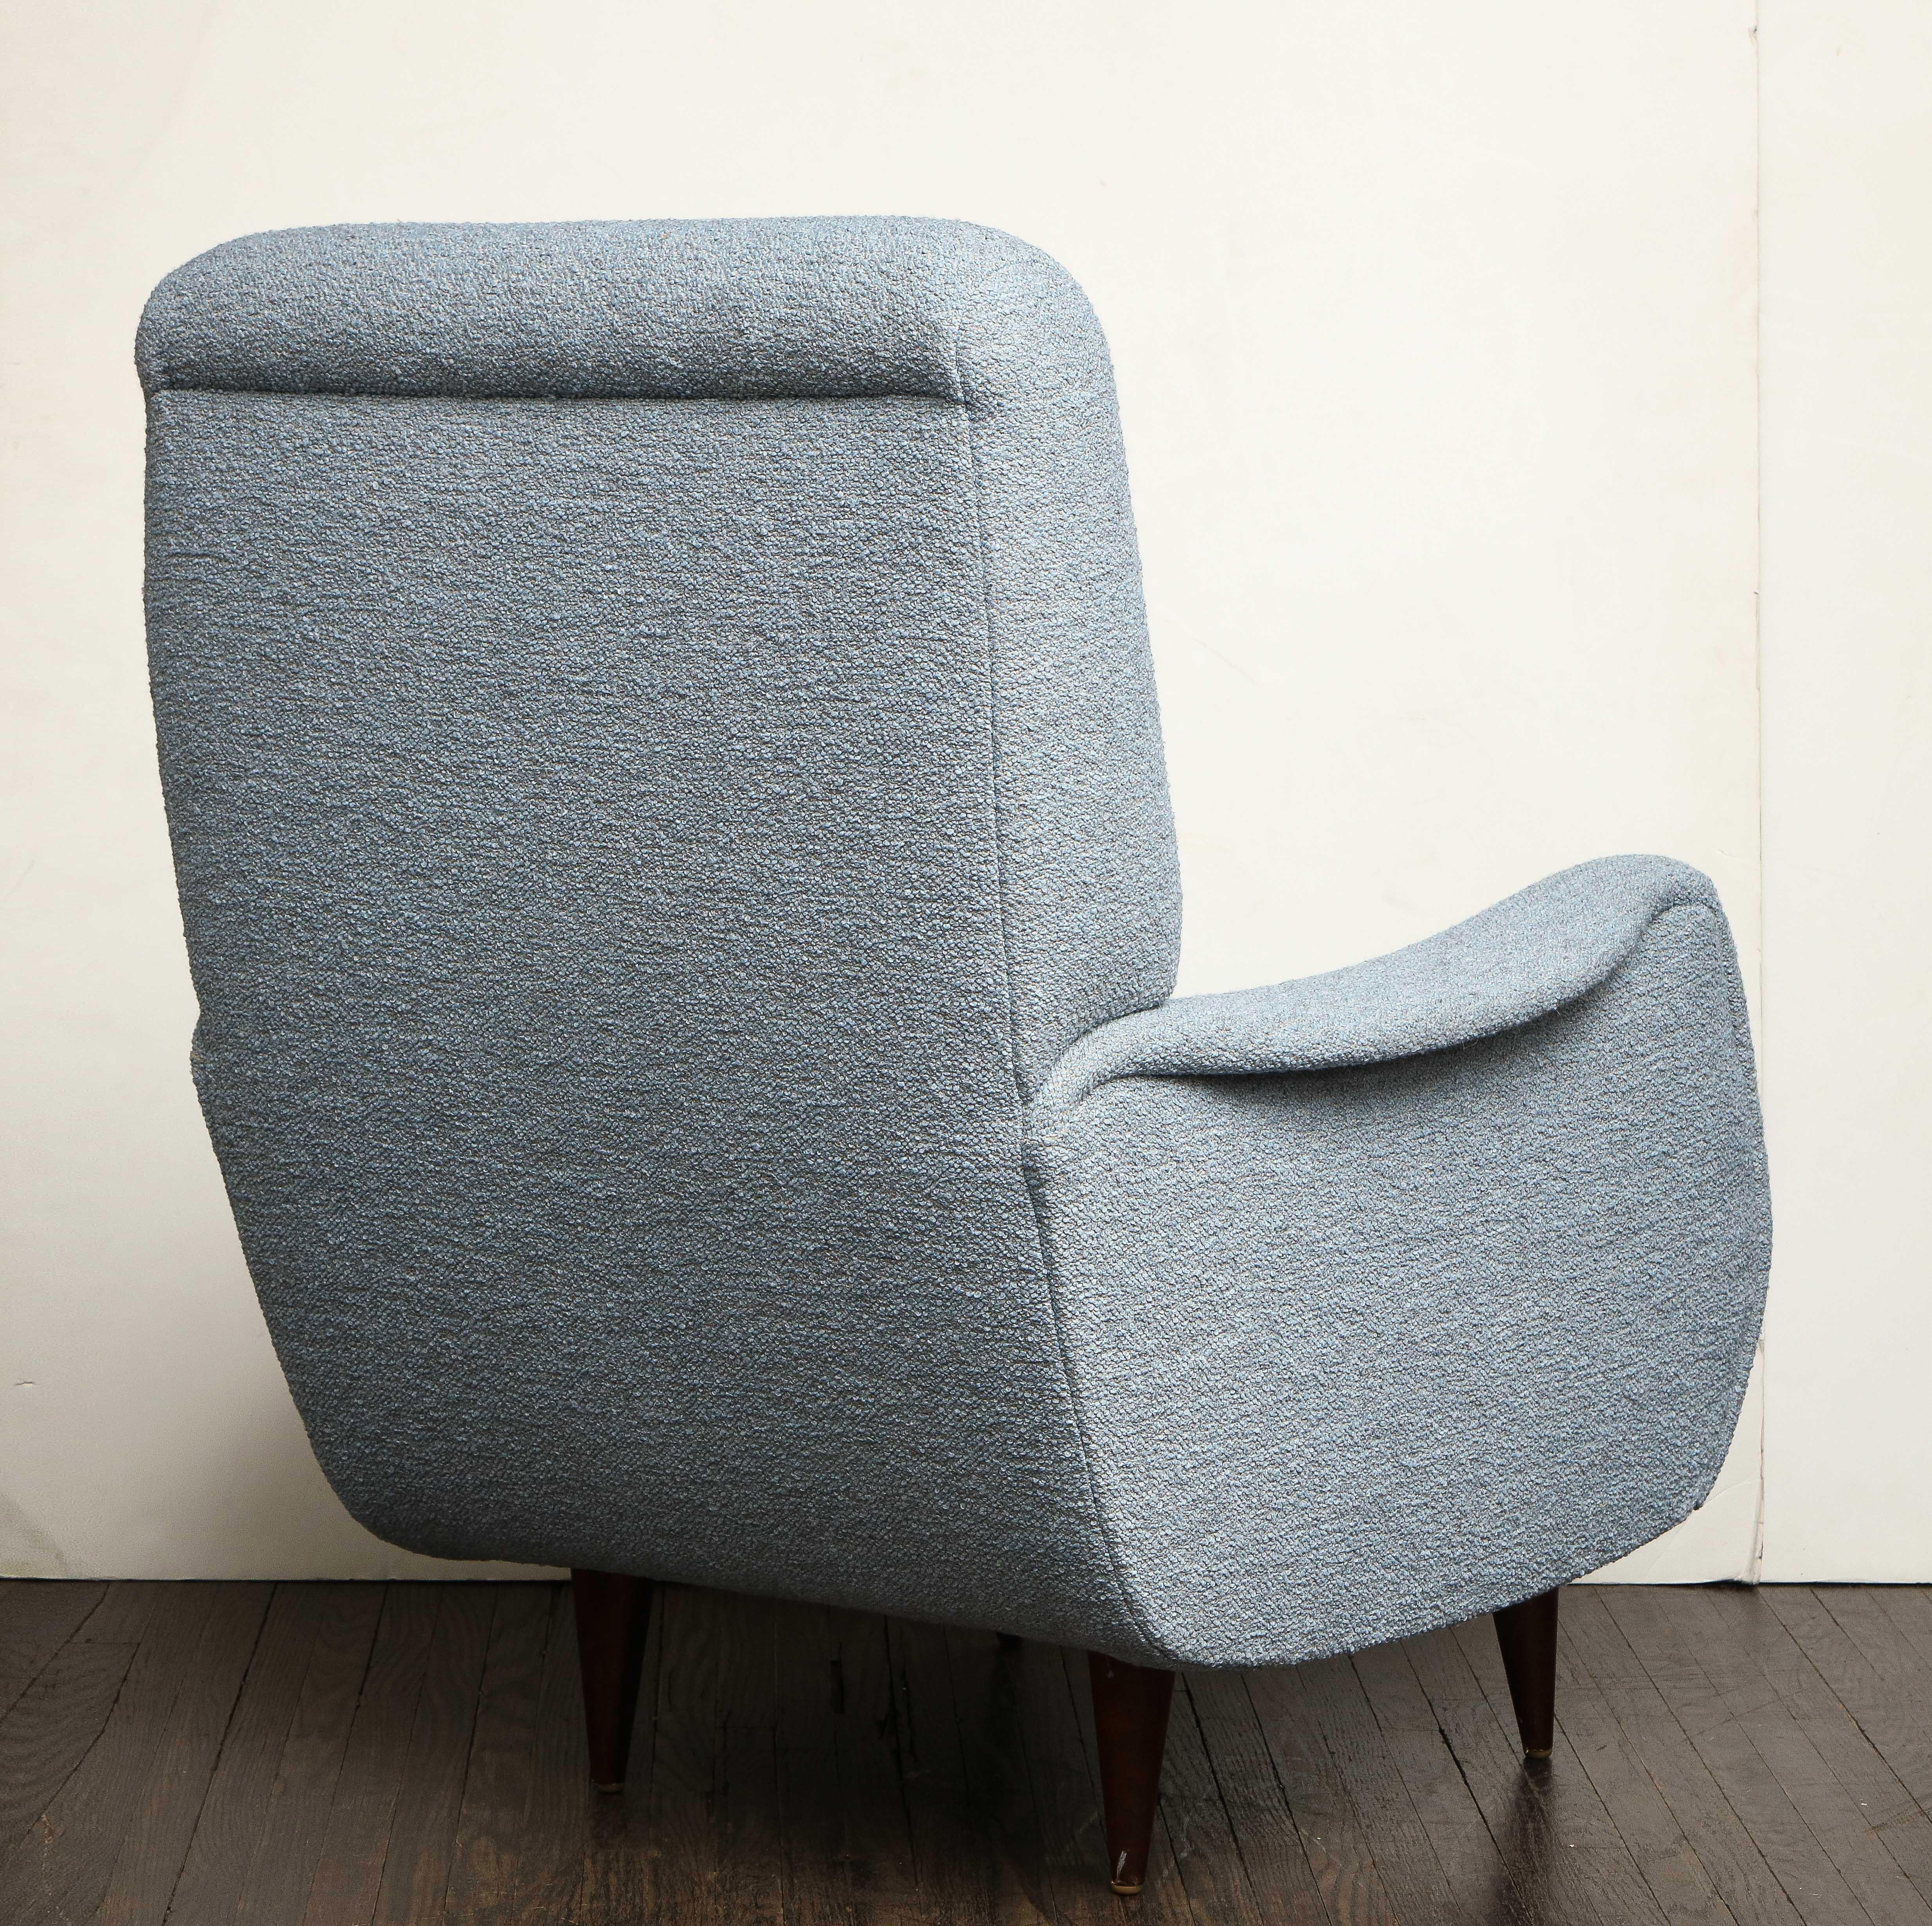 Pair of Vintage Italian Armchairs in Light Blue Boucle Upholstery 3